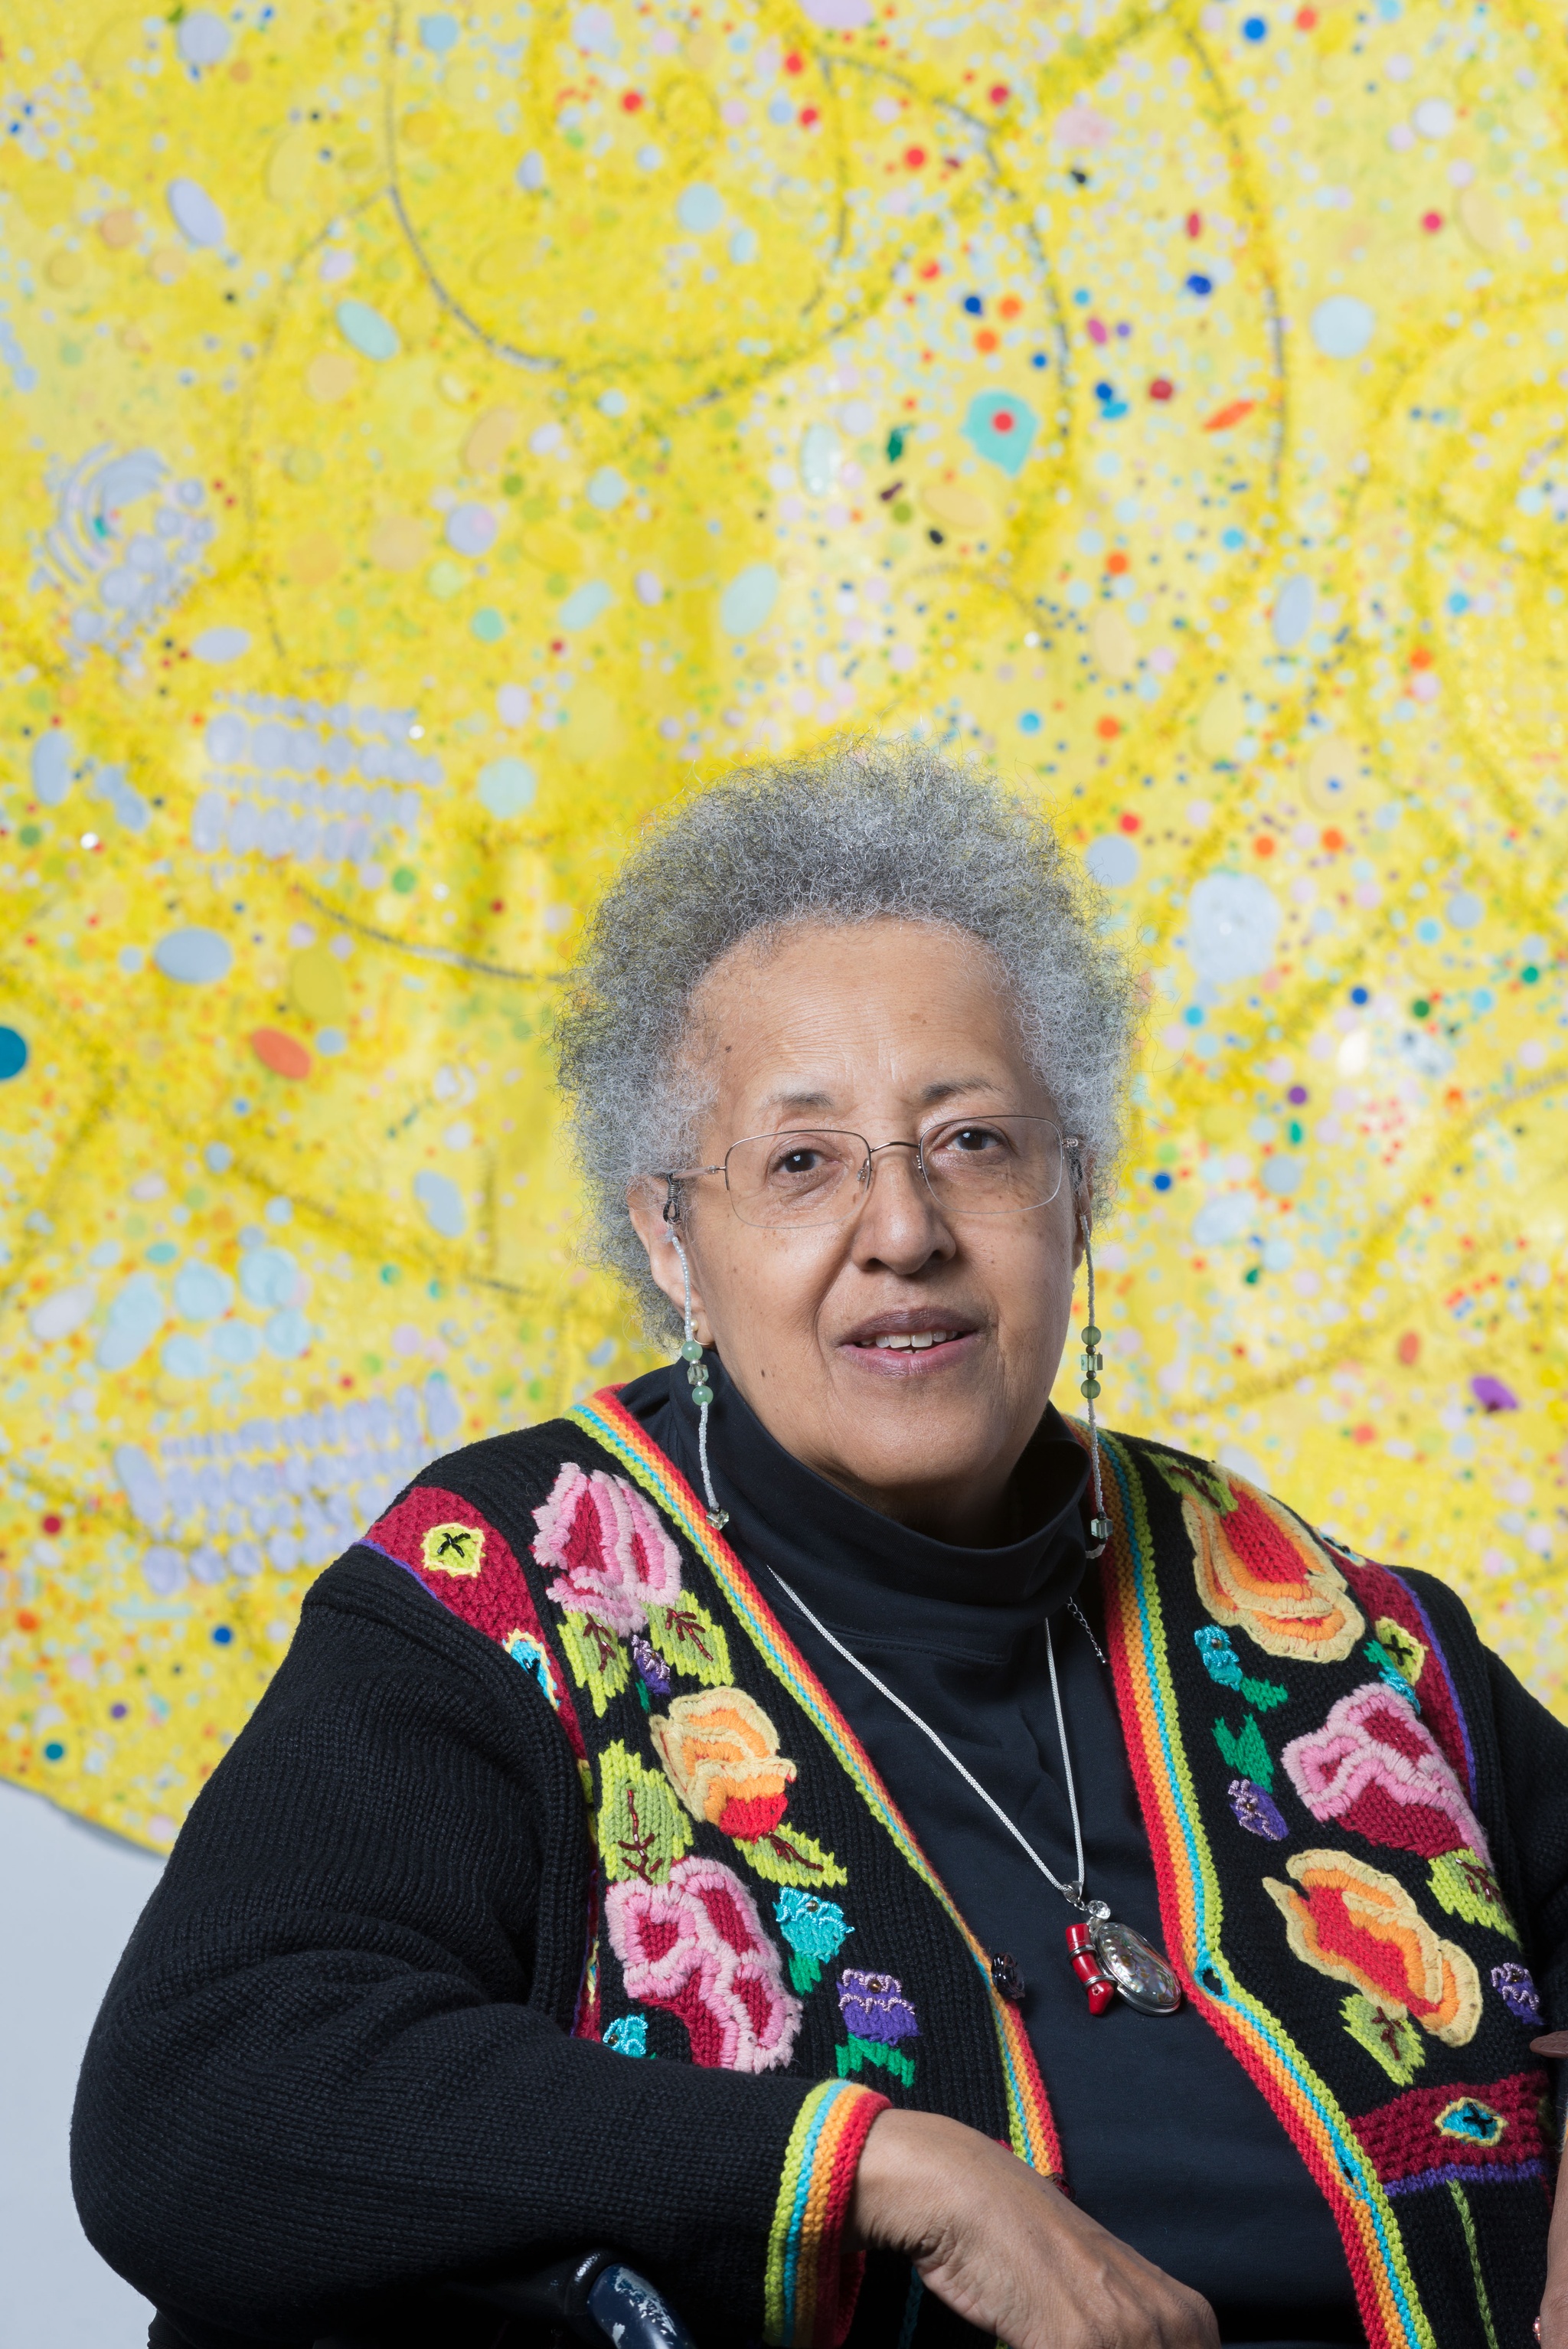 The artist Howardena Pindell sitting in front of one of her painting "Nautilus #1", a curvilinear, yellow, abstract canvas. Pindell wears a colorful cardigan over a dark-colored shirt. 